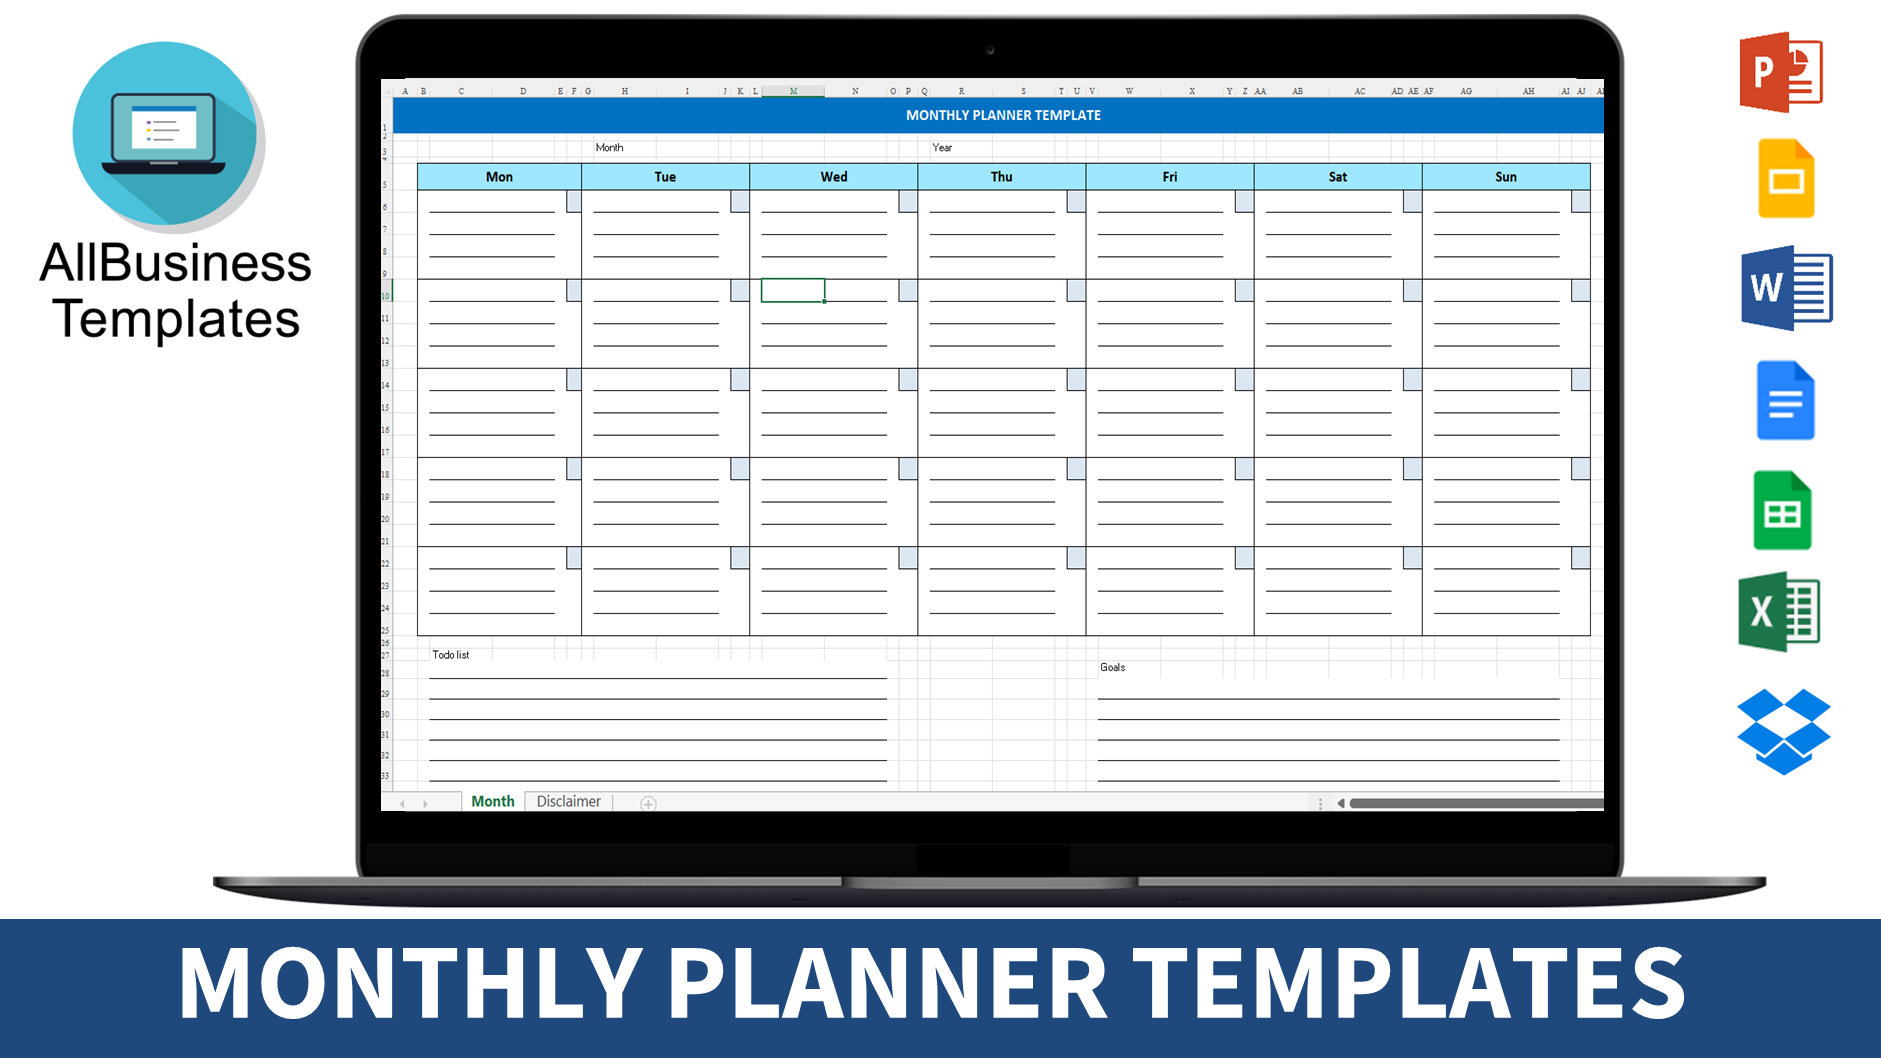 Monthly Planner Template 模板